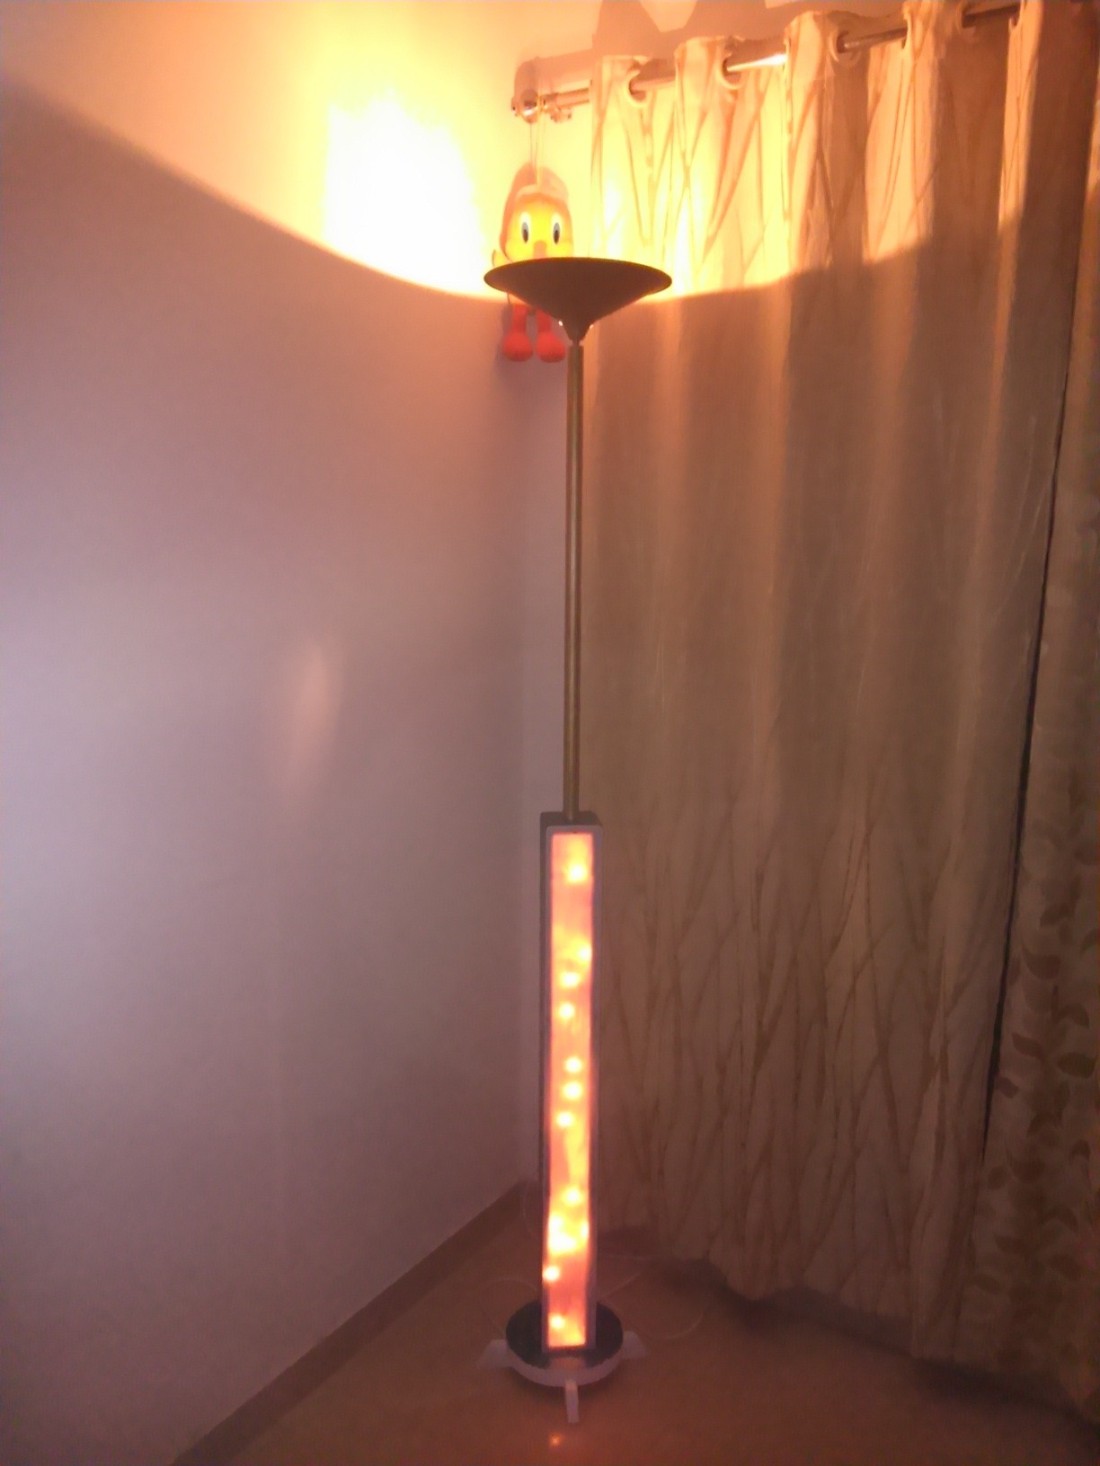 The completed tall lamp. I usually keep the lighted screen towards corner to give the room a warm hue.